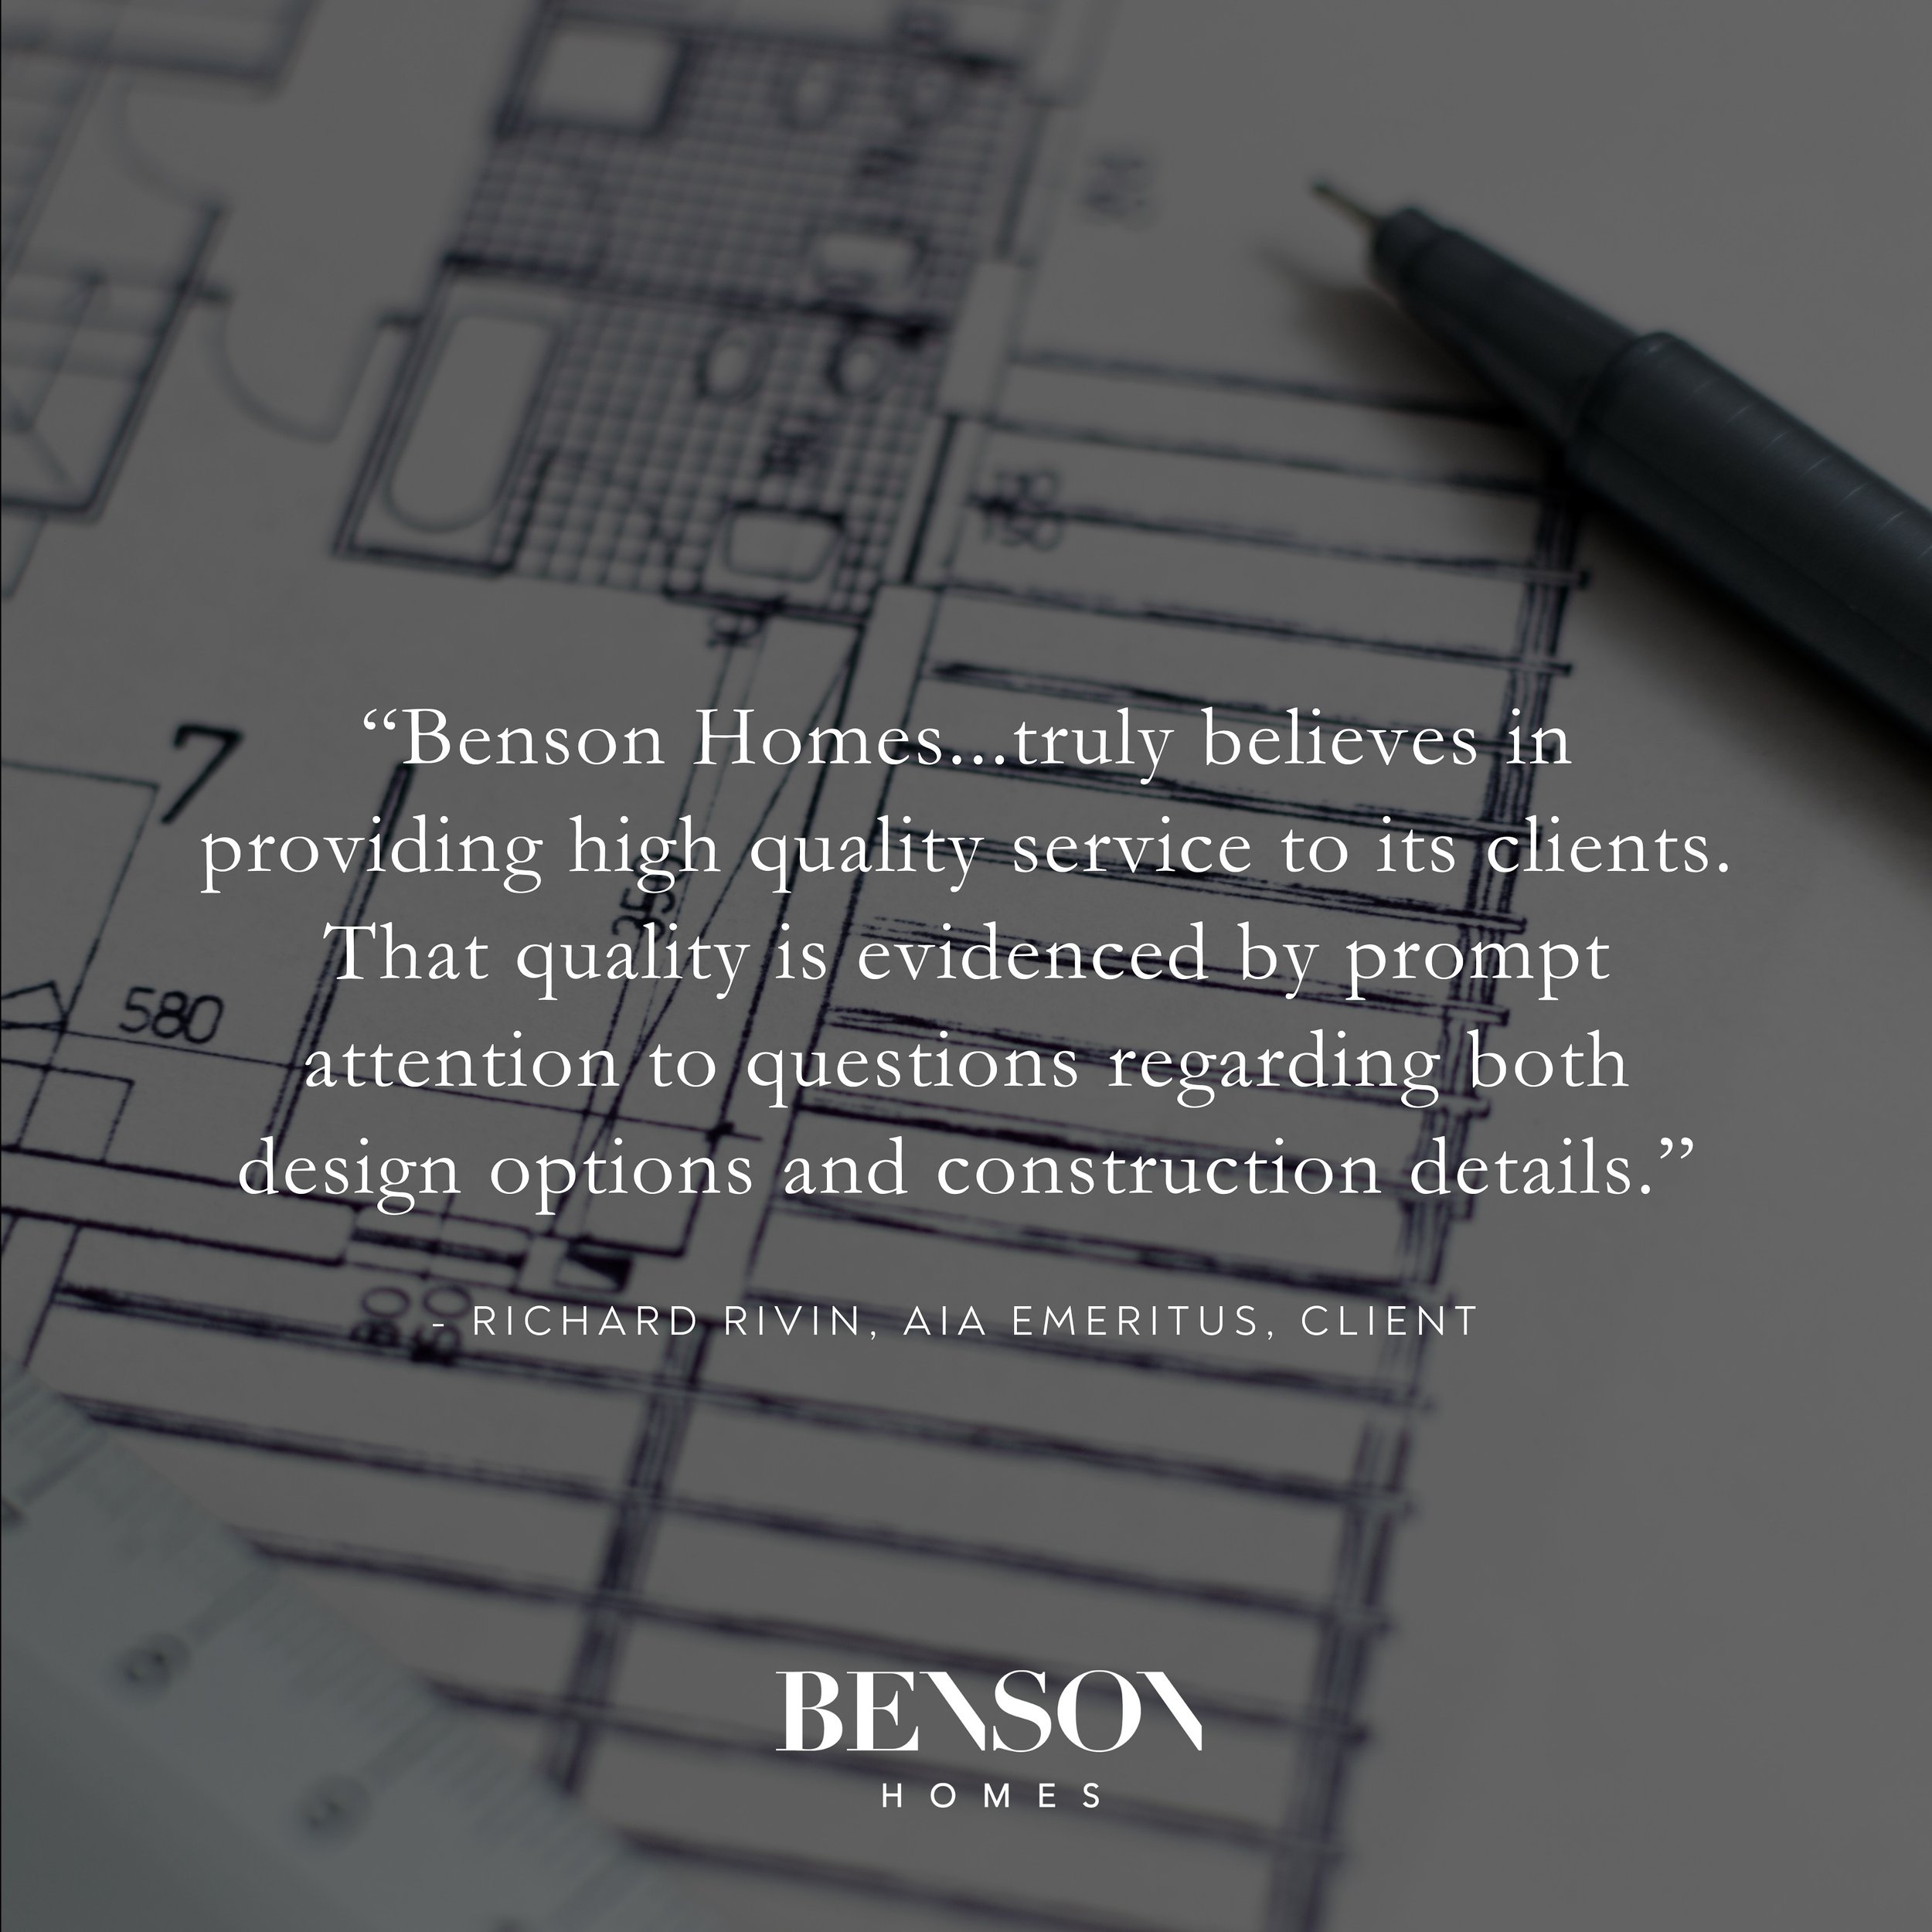 &ldquo;Benson Homes, Inc. truly believes in providing high quality service to its clients. That quality is evidenced by prompt attention to questions regarding  both design options and construction details. My own Coastal Virginia Kitchen; Dining/Lib